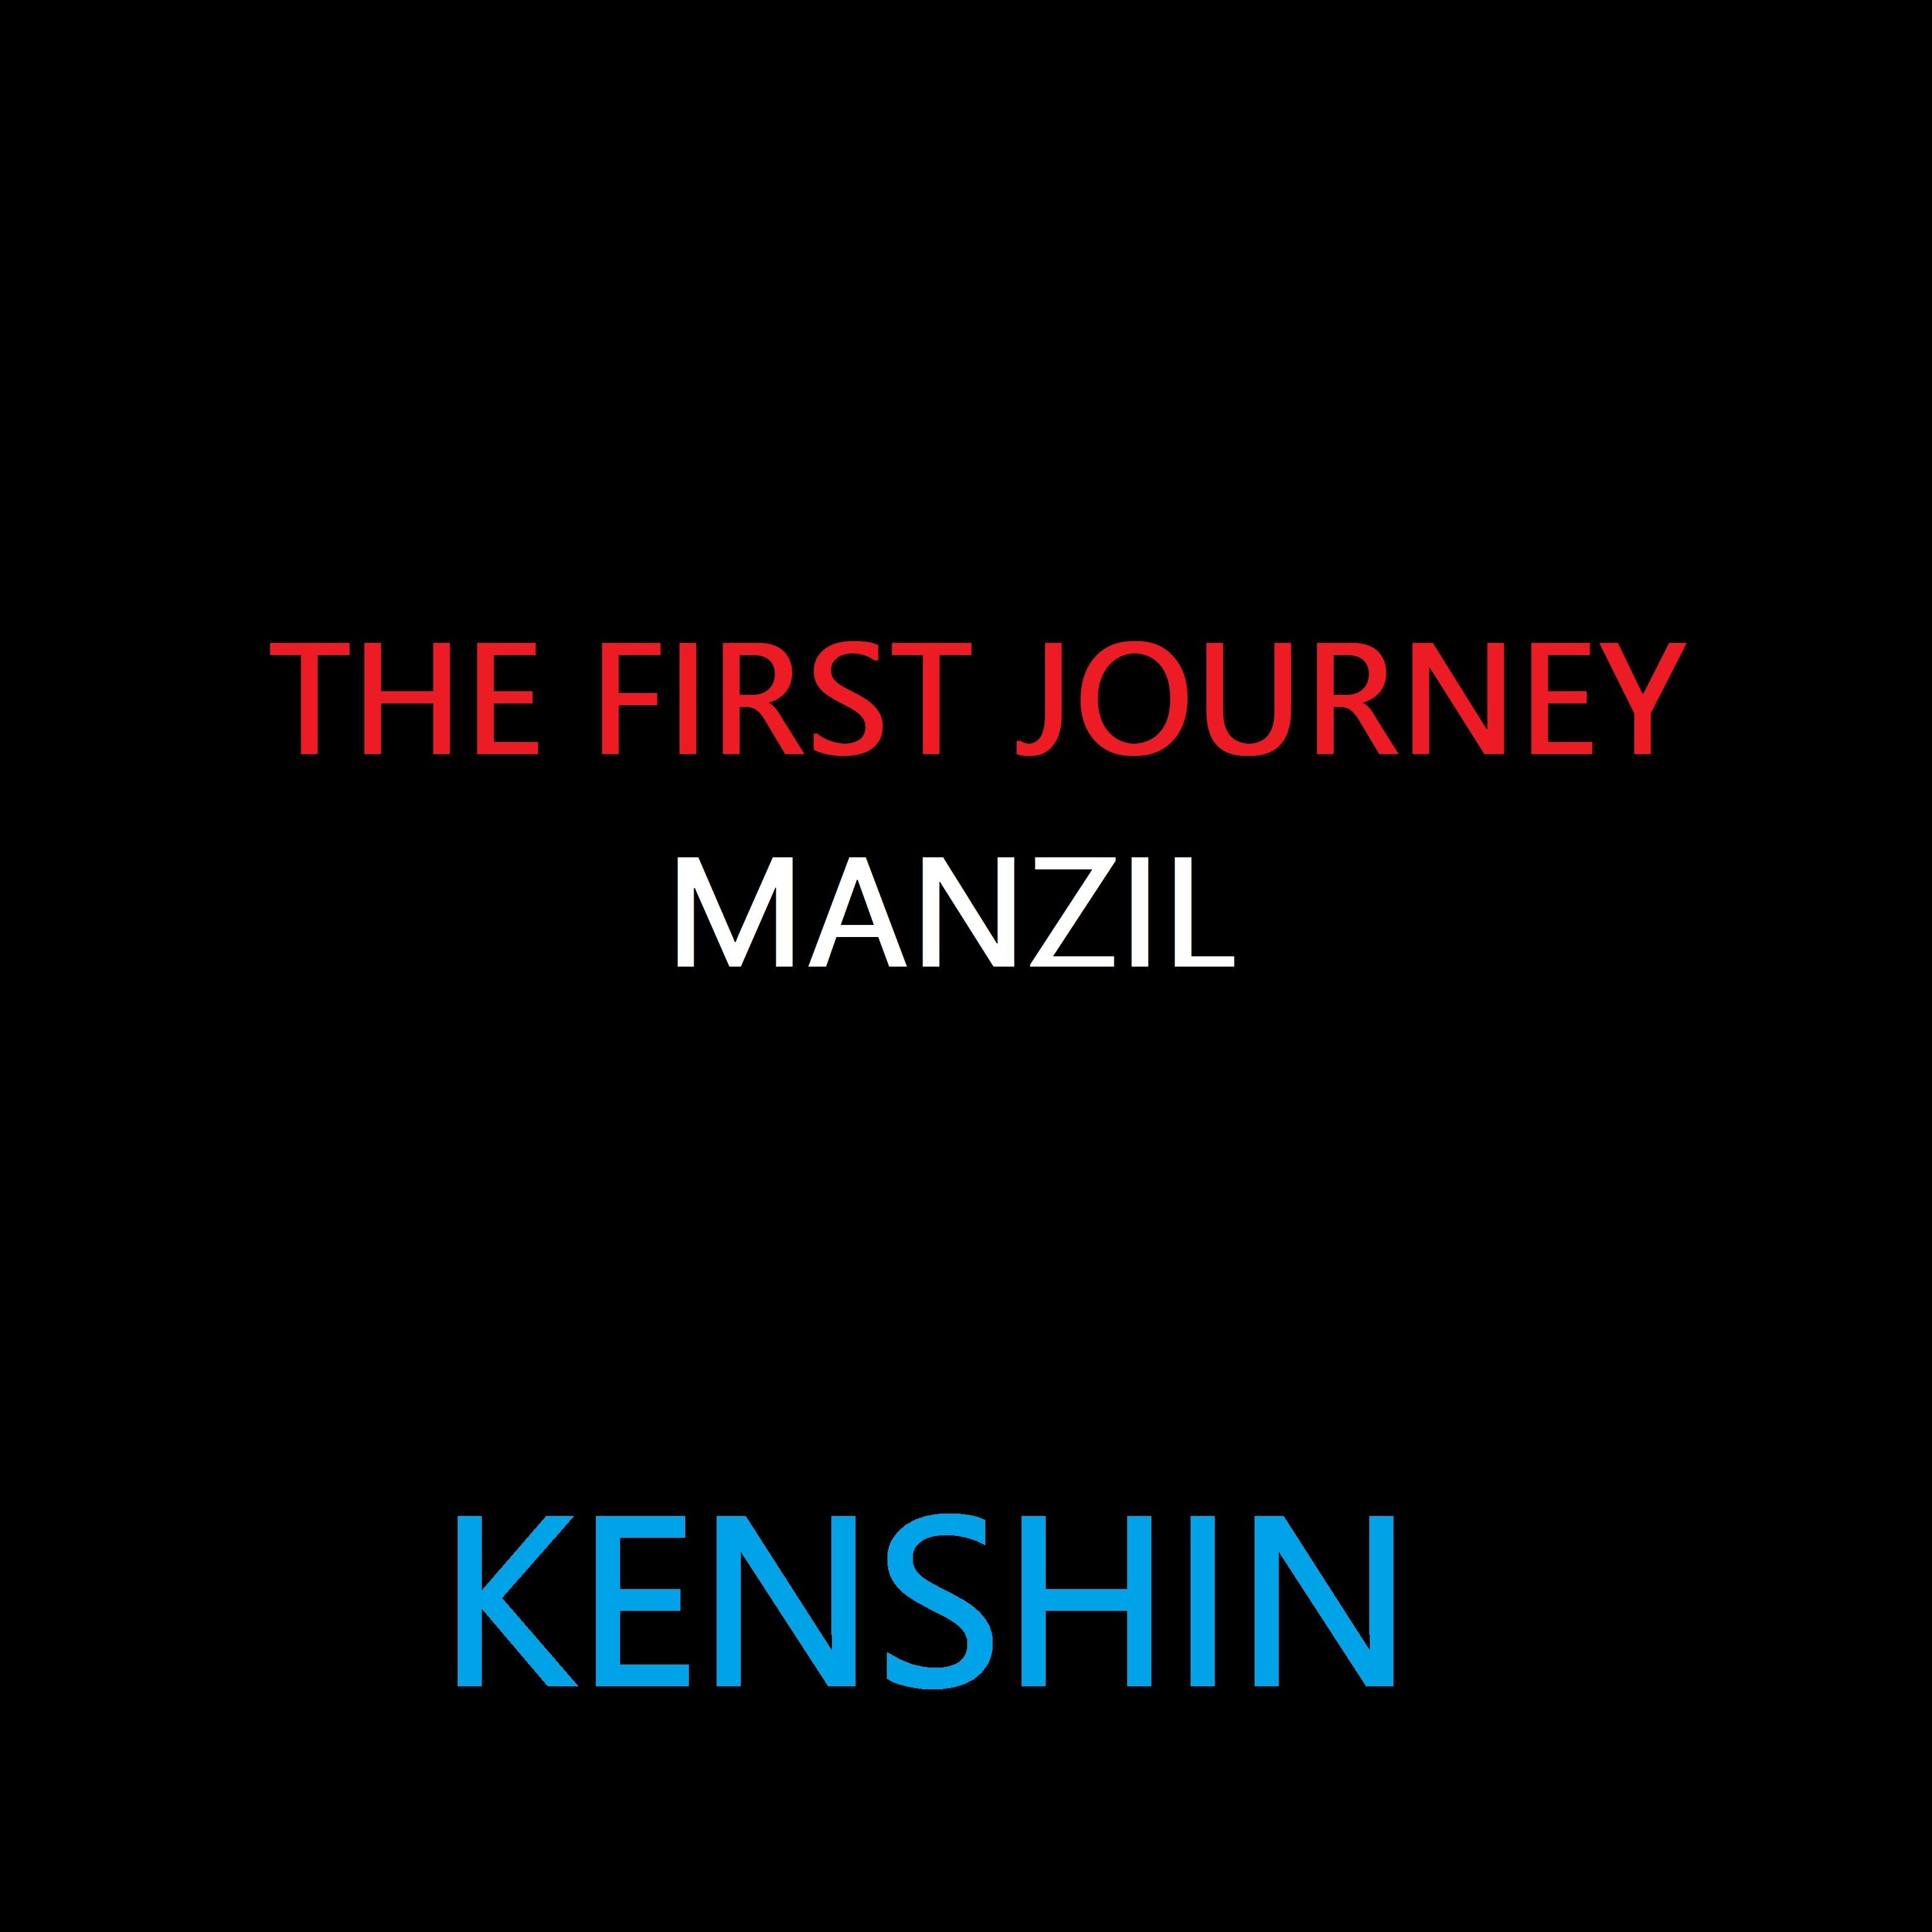 The First Journey Manzil